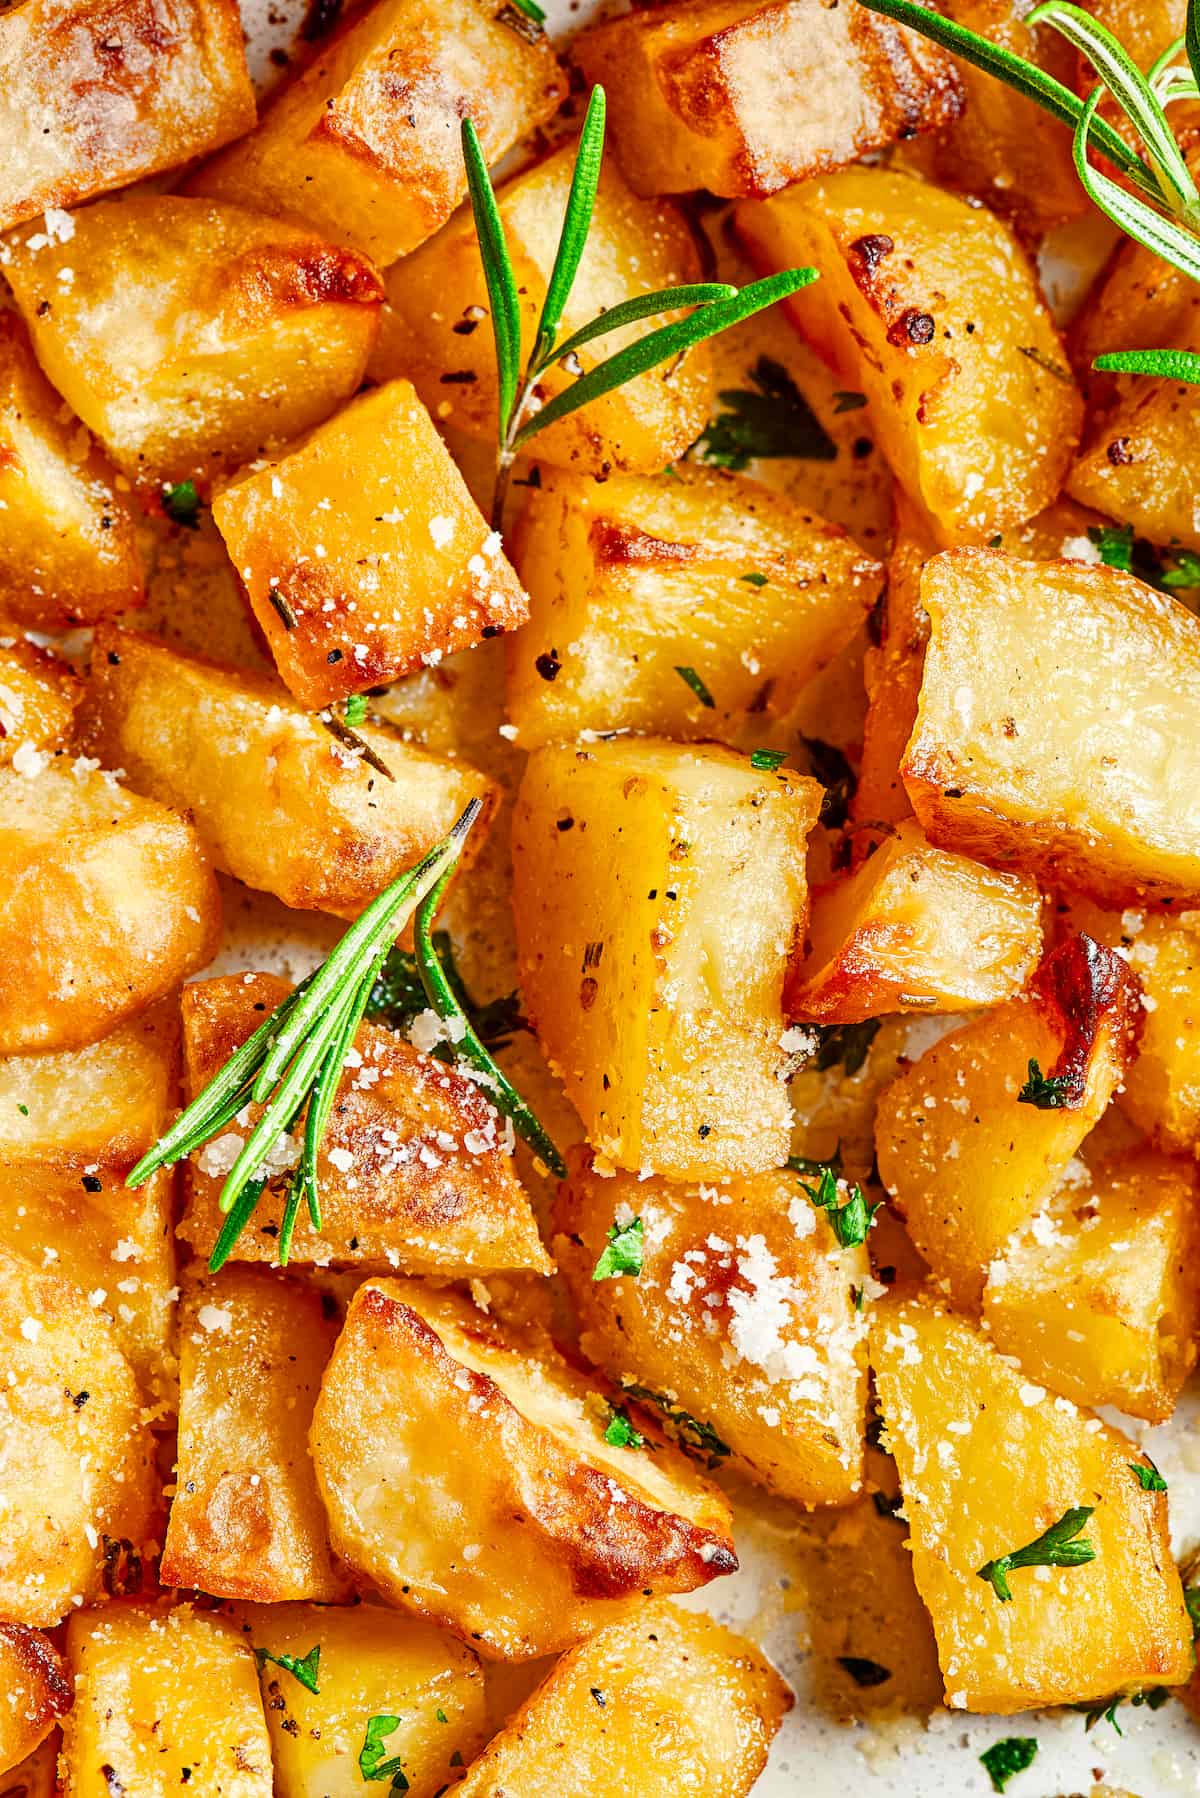 close up shot of oven roasted potatoes garnished with rosemary leaves and grated cheese.